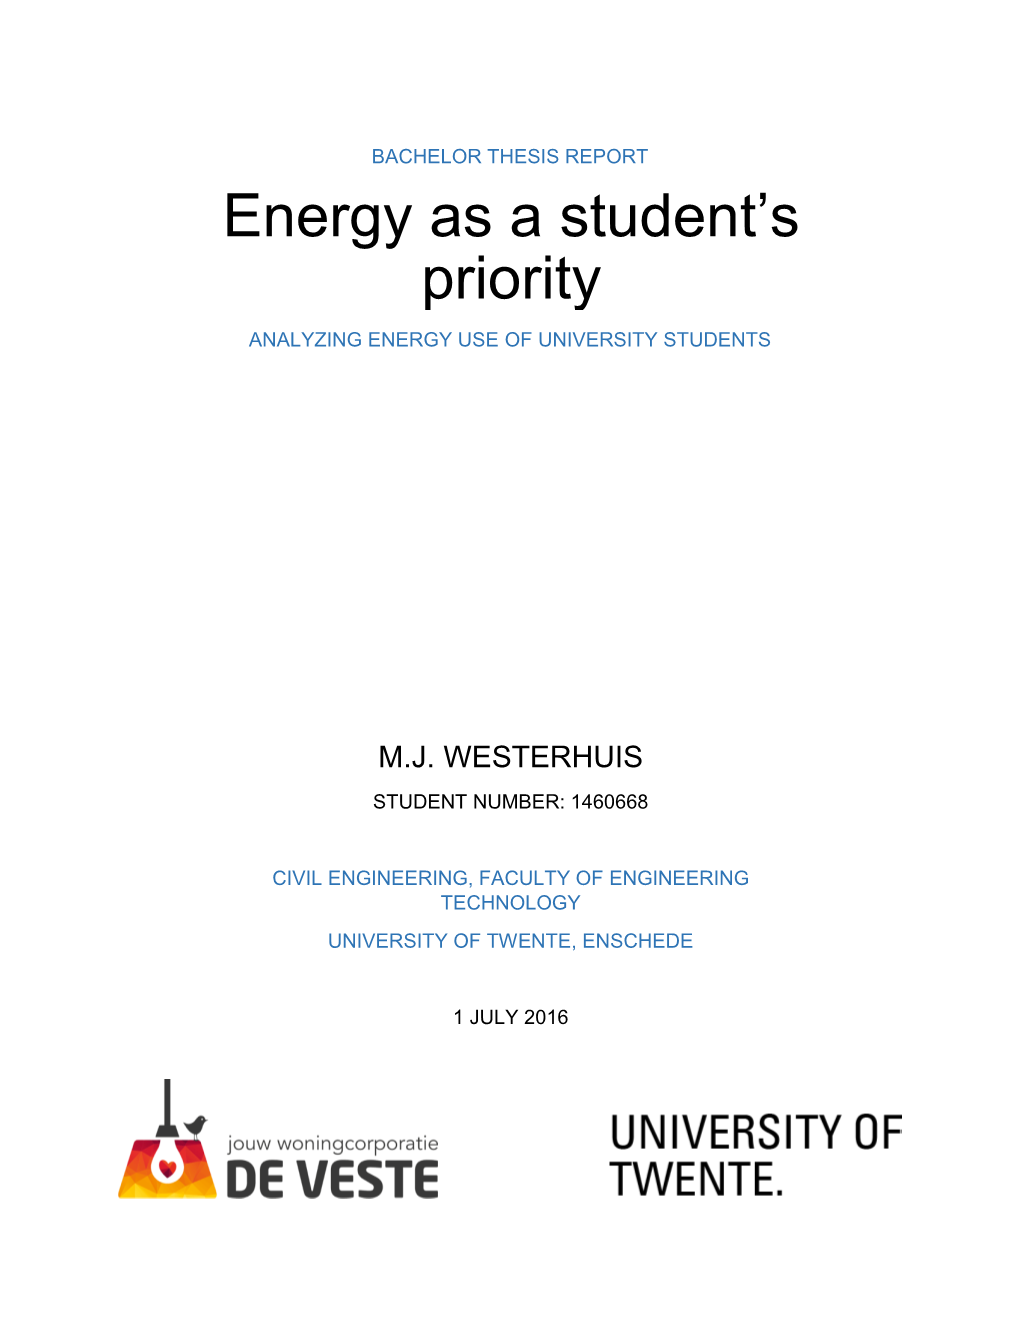 Energy As a Student's Priority